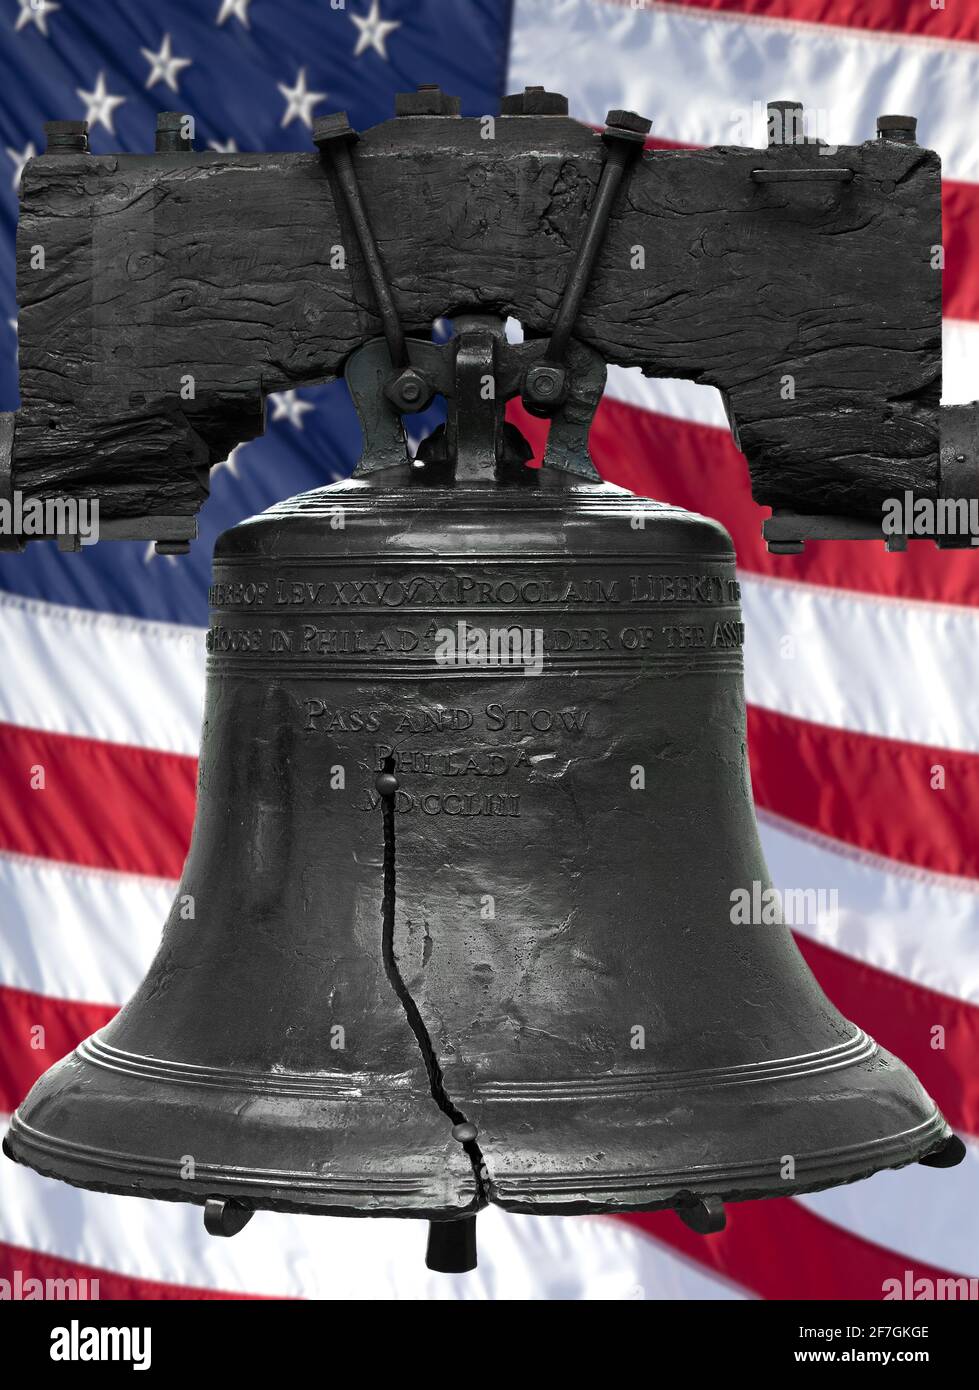 Isolated statue of the authentic Liberty Bell, Philadelphia, PA. The United States flag was digitally added to the background. Stock Photo